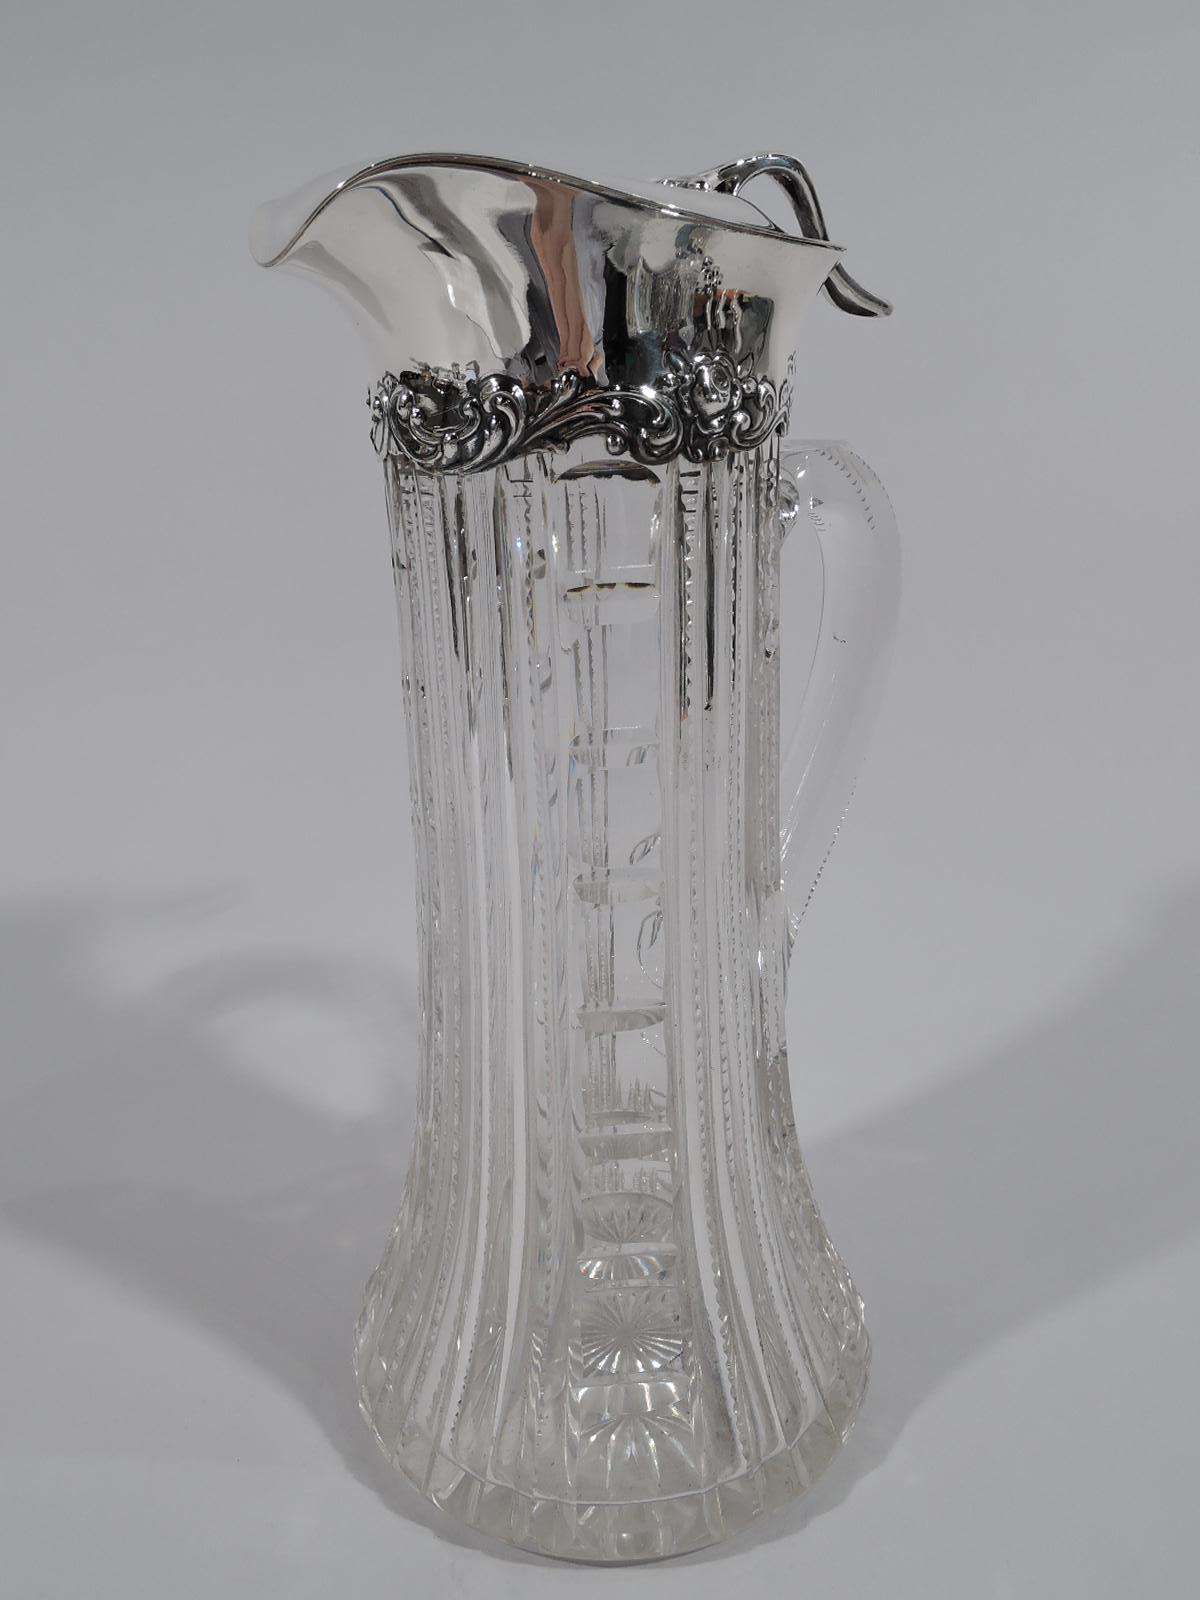 Turn-of-the-century brilliant-cut glass claret jug with sterling silver mount. Made by Gorham in Providence. Cylindrical with spread base and high-looping handle. Vertical ornament with flutes, notches, and stylized egg-and-dart. Sterling silver